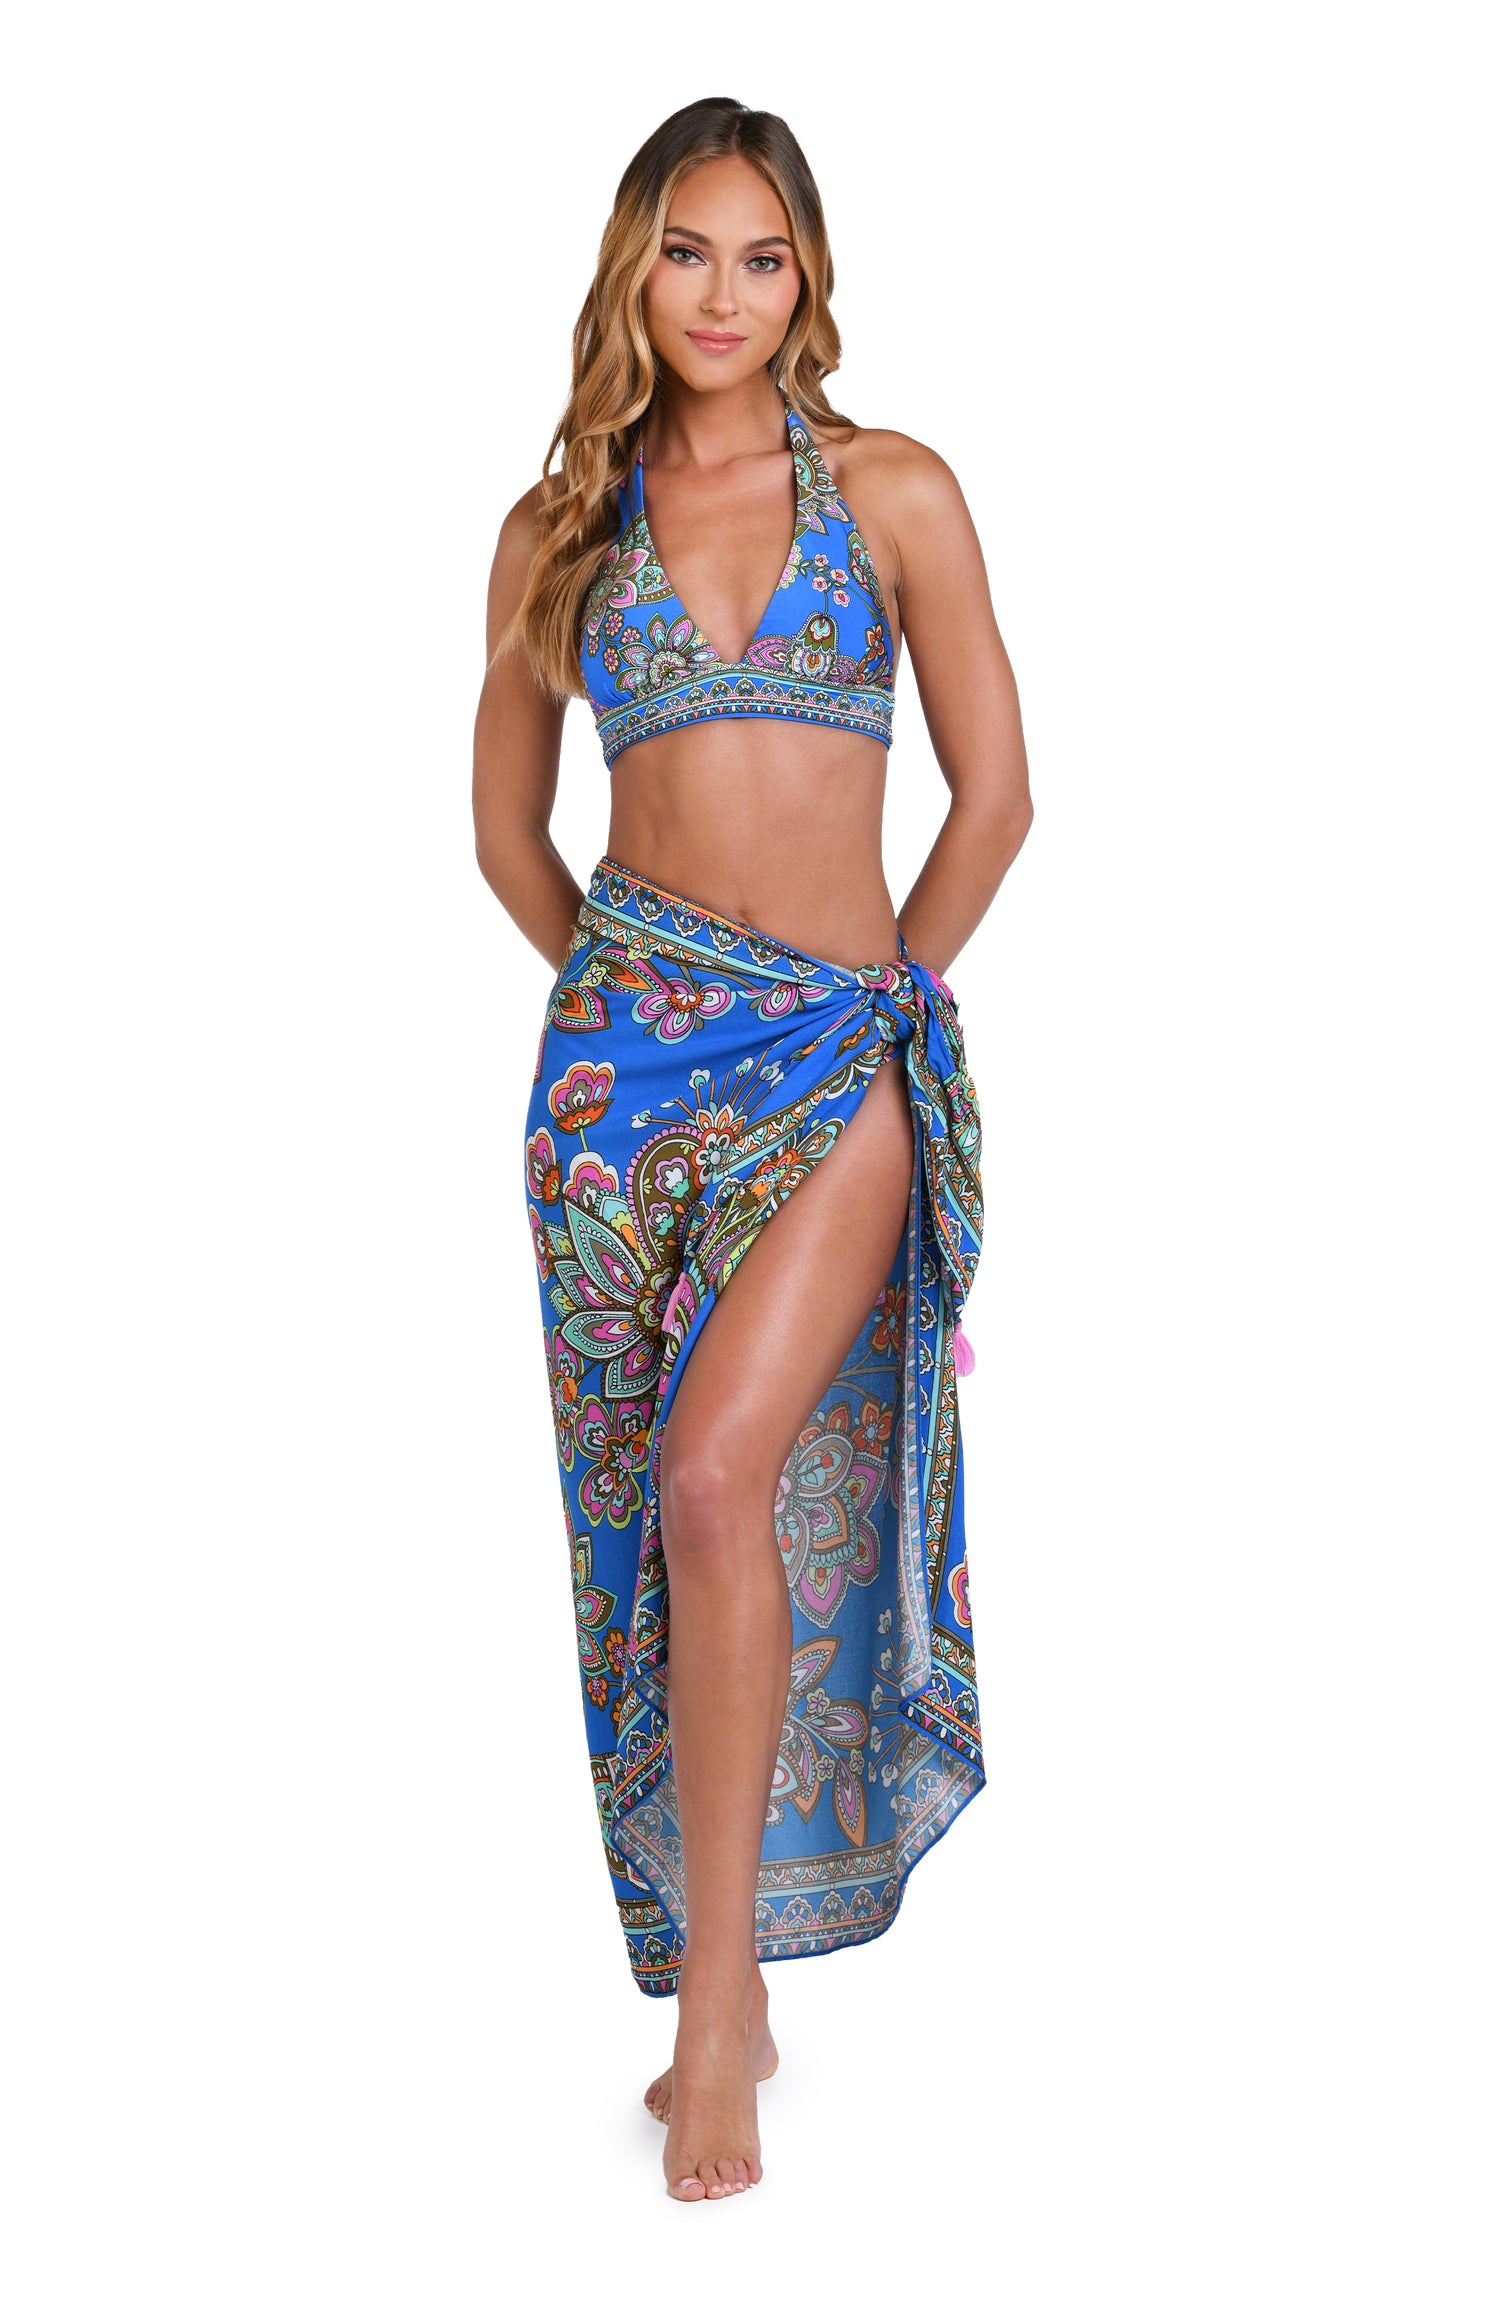 Model is wearing a pink, orange, teal, and green multicolored floral patterned pareo swimsuit cover up set against an indigo blue background.